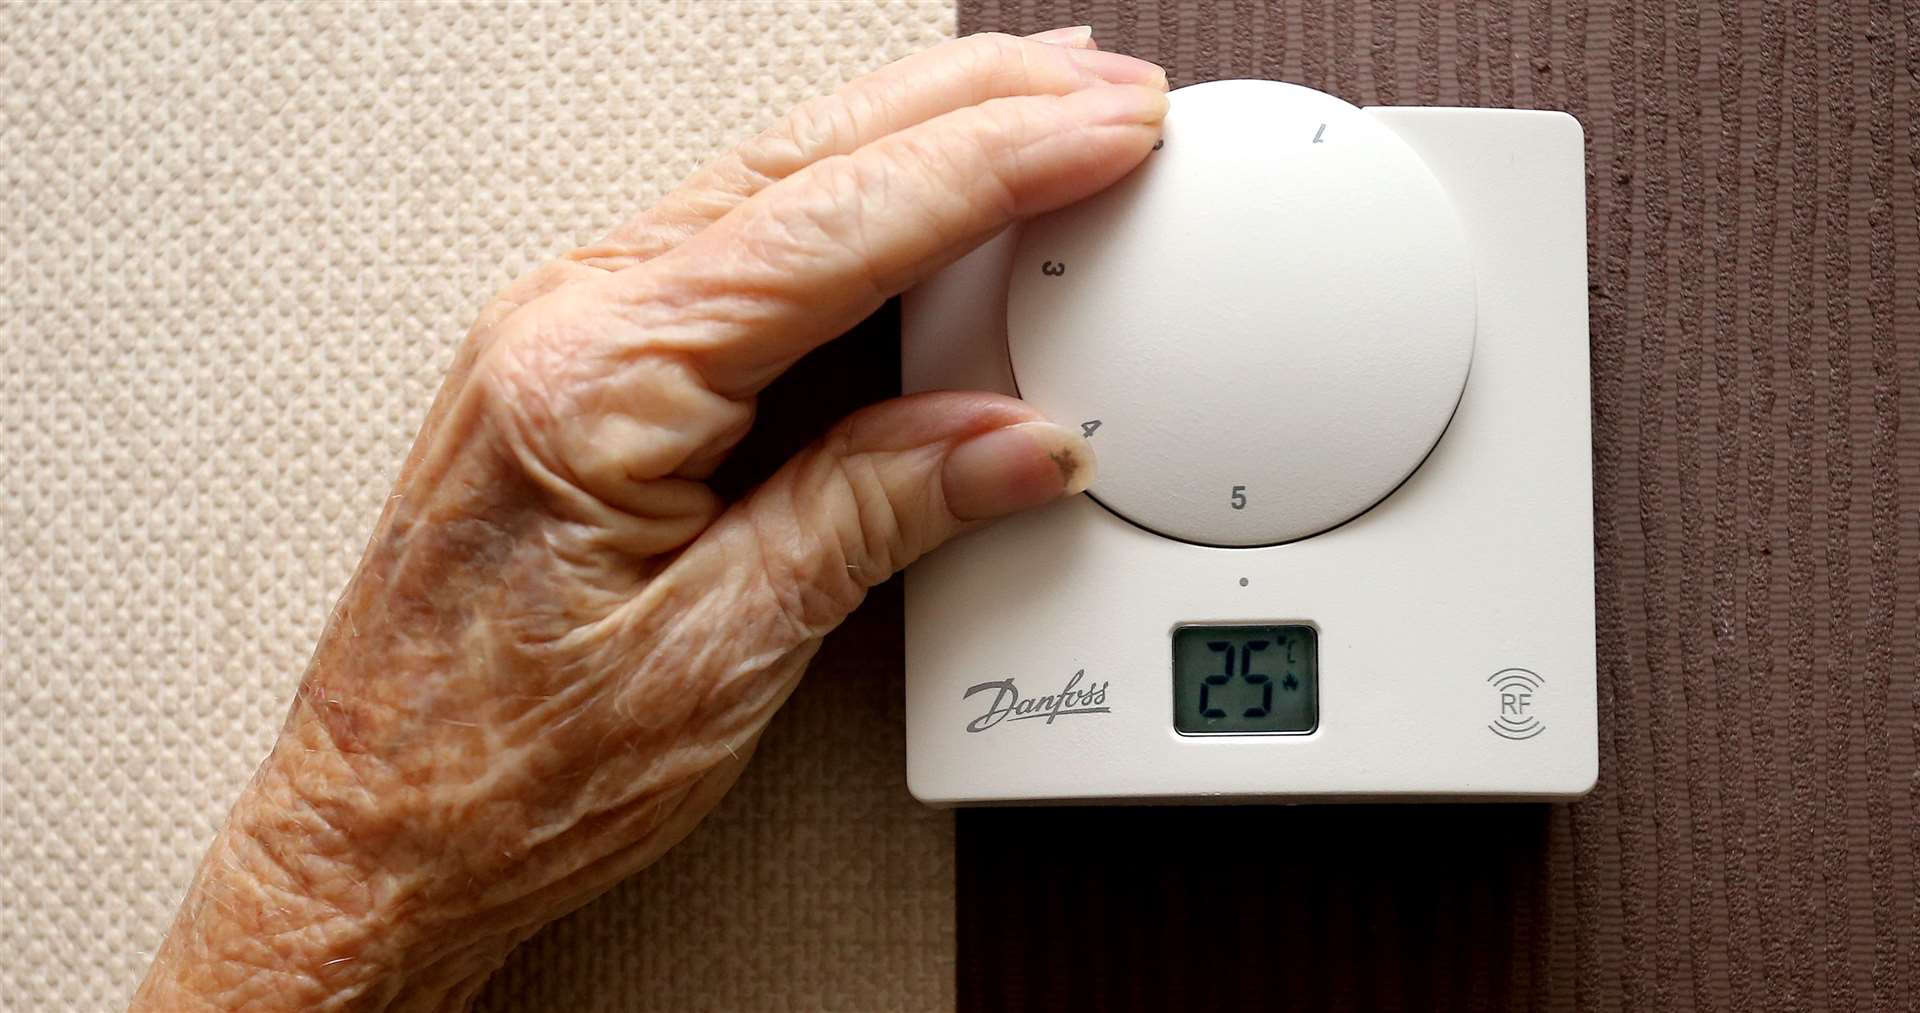 Households are being given £400 this winter to help cover rising energy bills. Image: iStock.